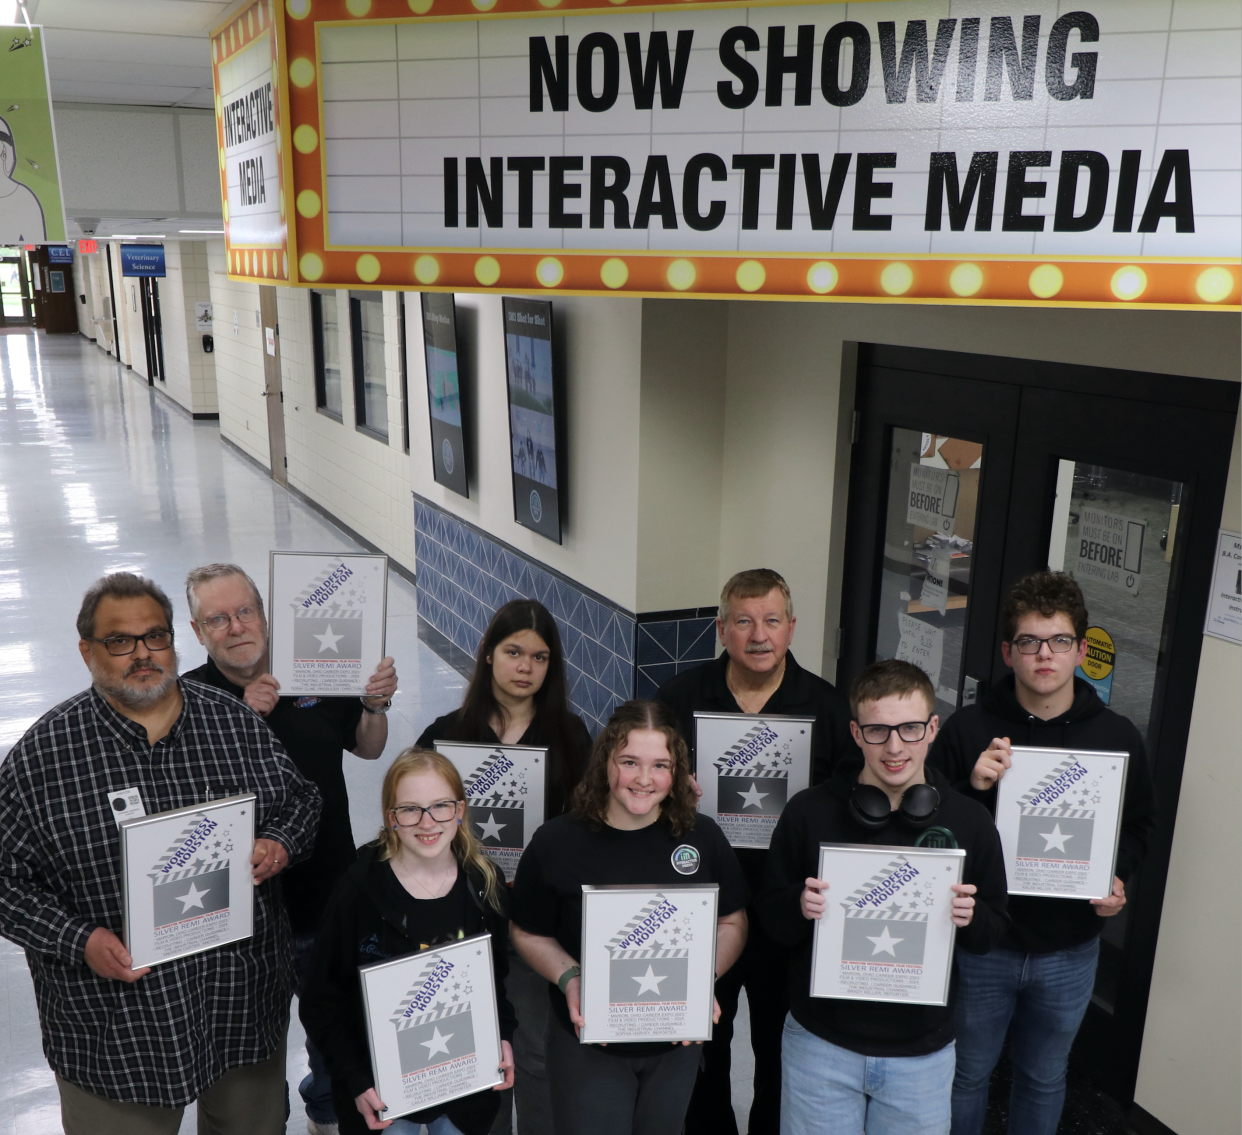 Displaying their Silver REMI Award certificates presented to them for their "Marion Career EXPO 2023" video are Andrew Carter, left, Terry Cline, Cailea Williams, Kassidy DeSouza, Sophia Harvey, Frank Gibson, Brady Keller and Kaleb Miller. Not pictured is Kevin Evanoski.